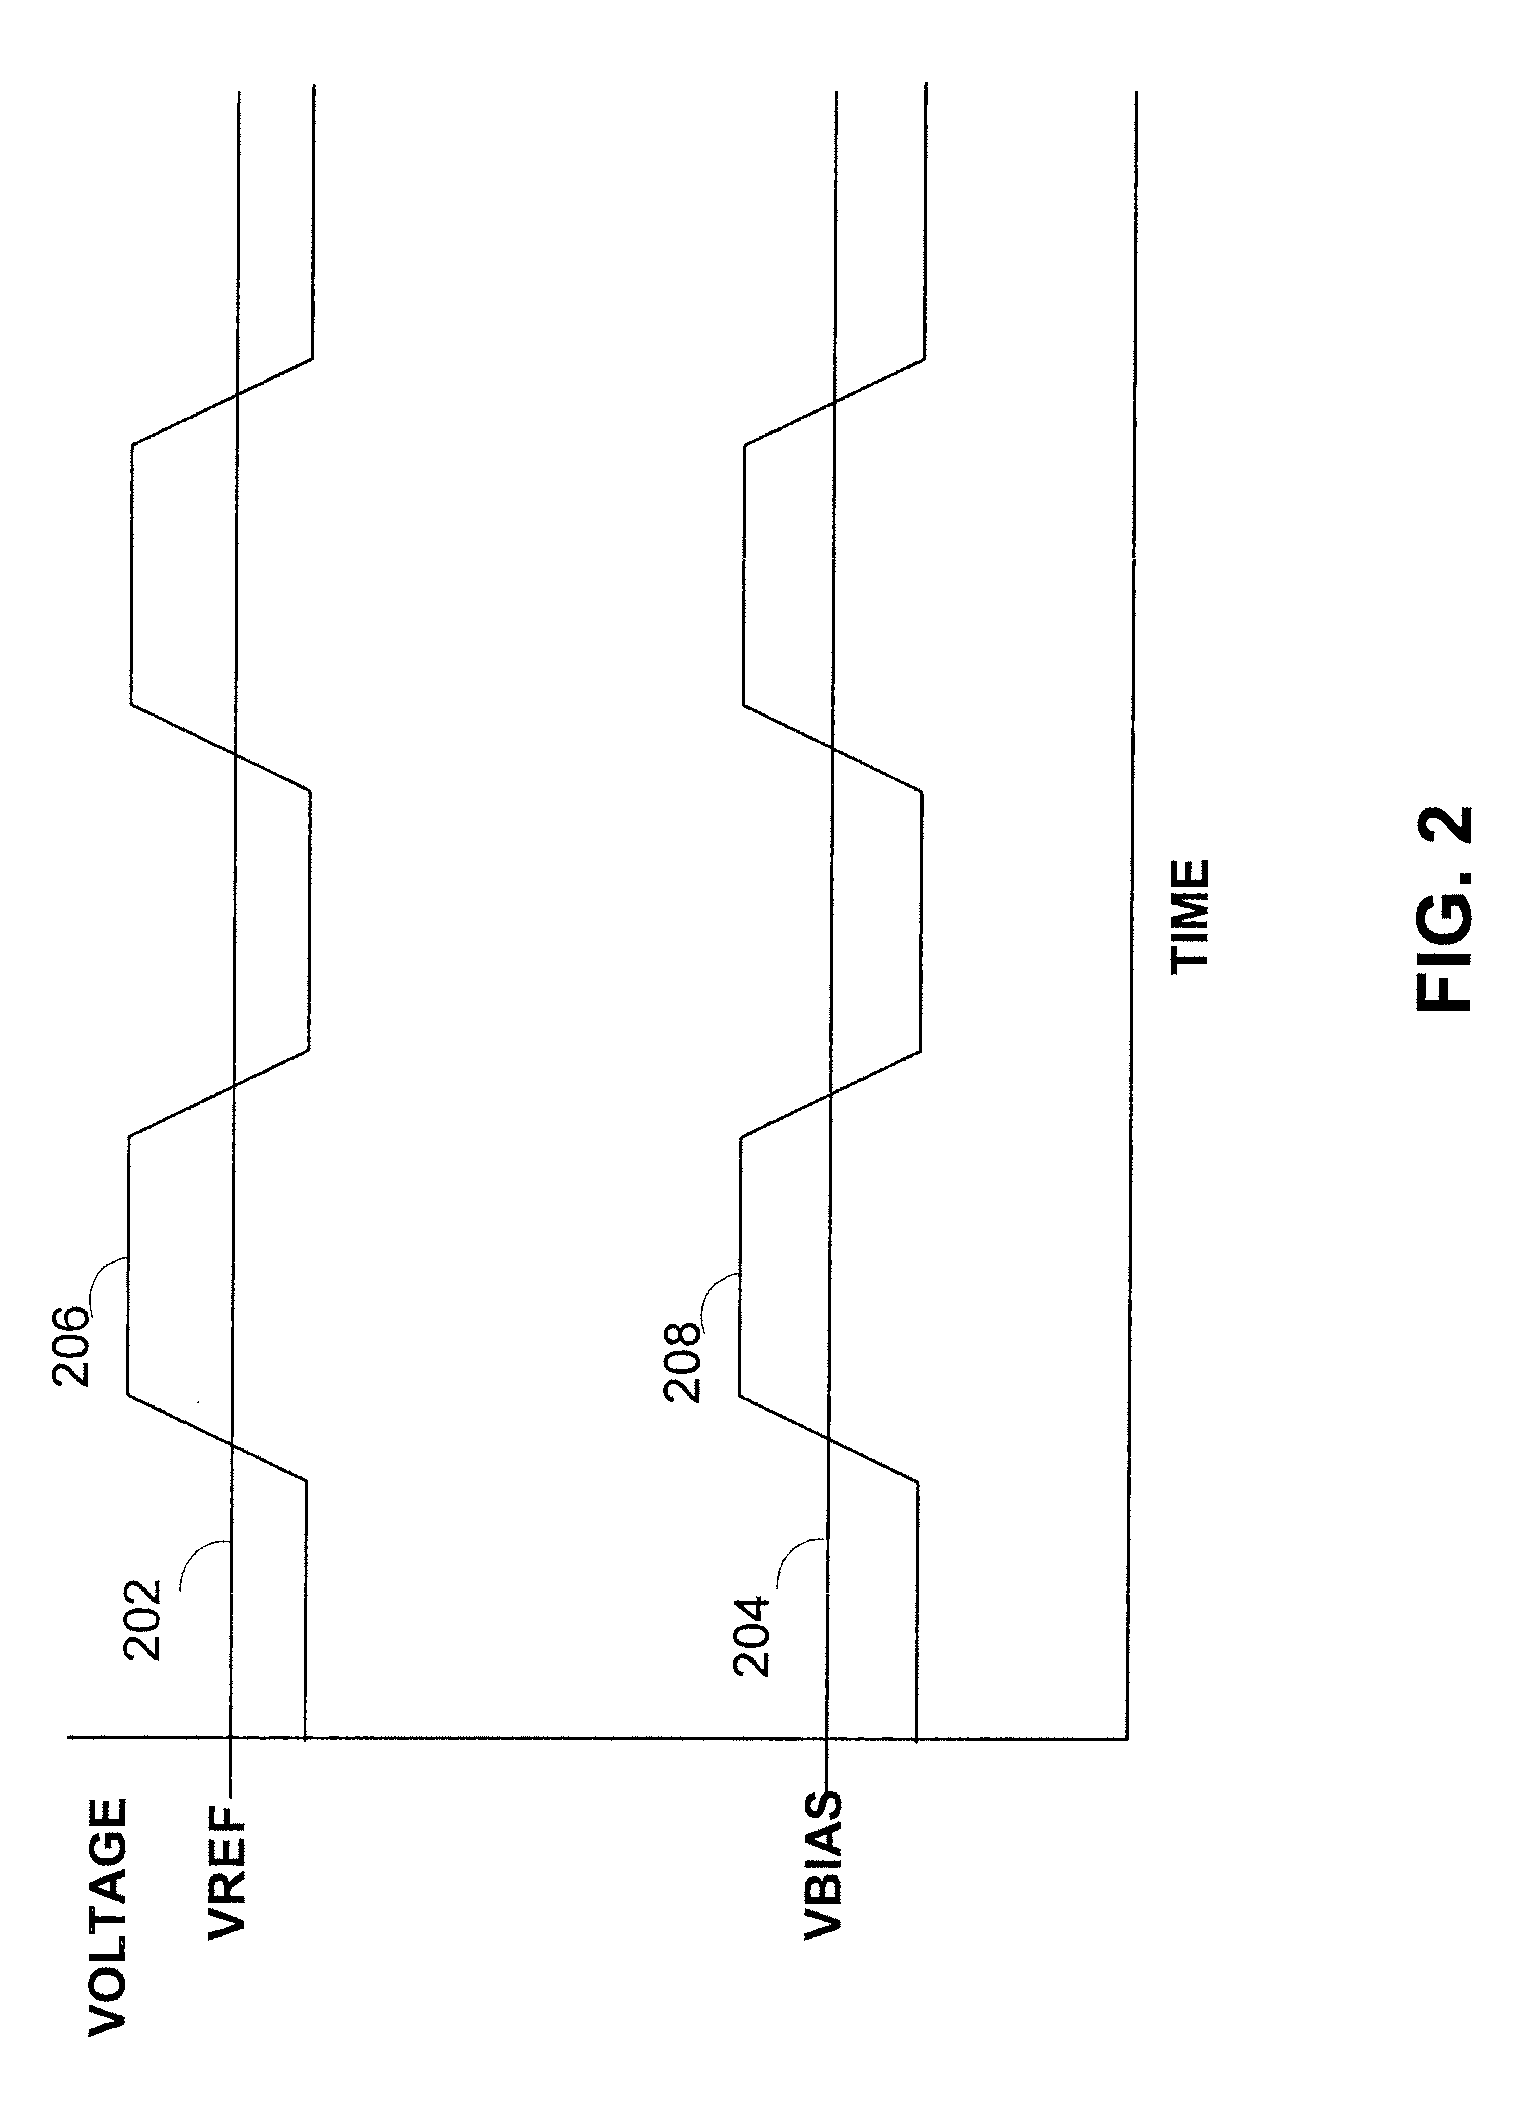 Method and apparatus for controlled voltage level shifting